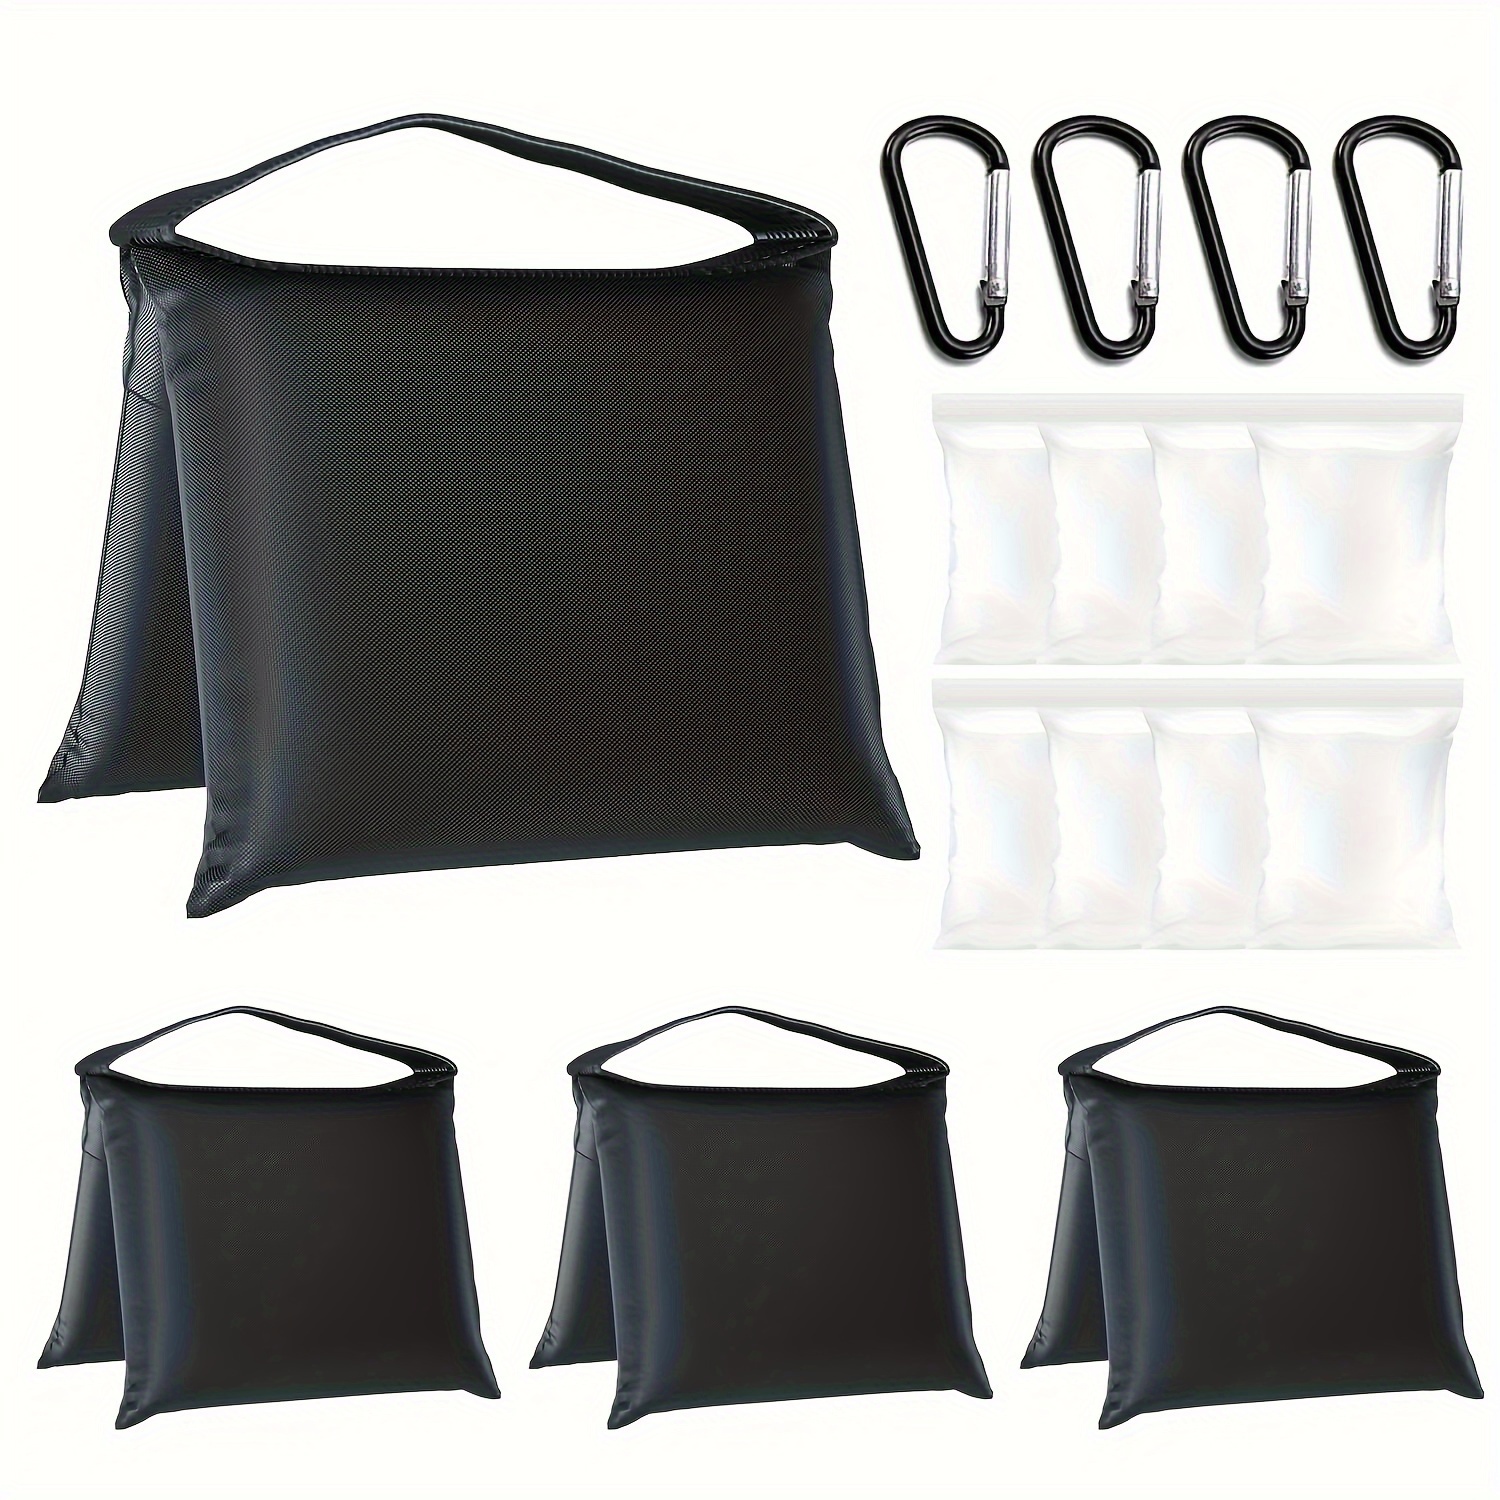 

4-pcs Photography Sandbags For Tripod Stabilization, Black Weight Bags With 4 Aluminum Carabiners, 8 Pe Zip Seal Bags (sand Not Included), Durable For Video Tripods, Tents, Umbrellas - 21.8in X 10.8in